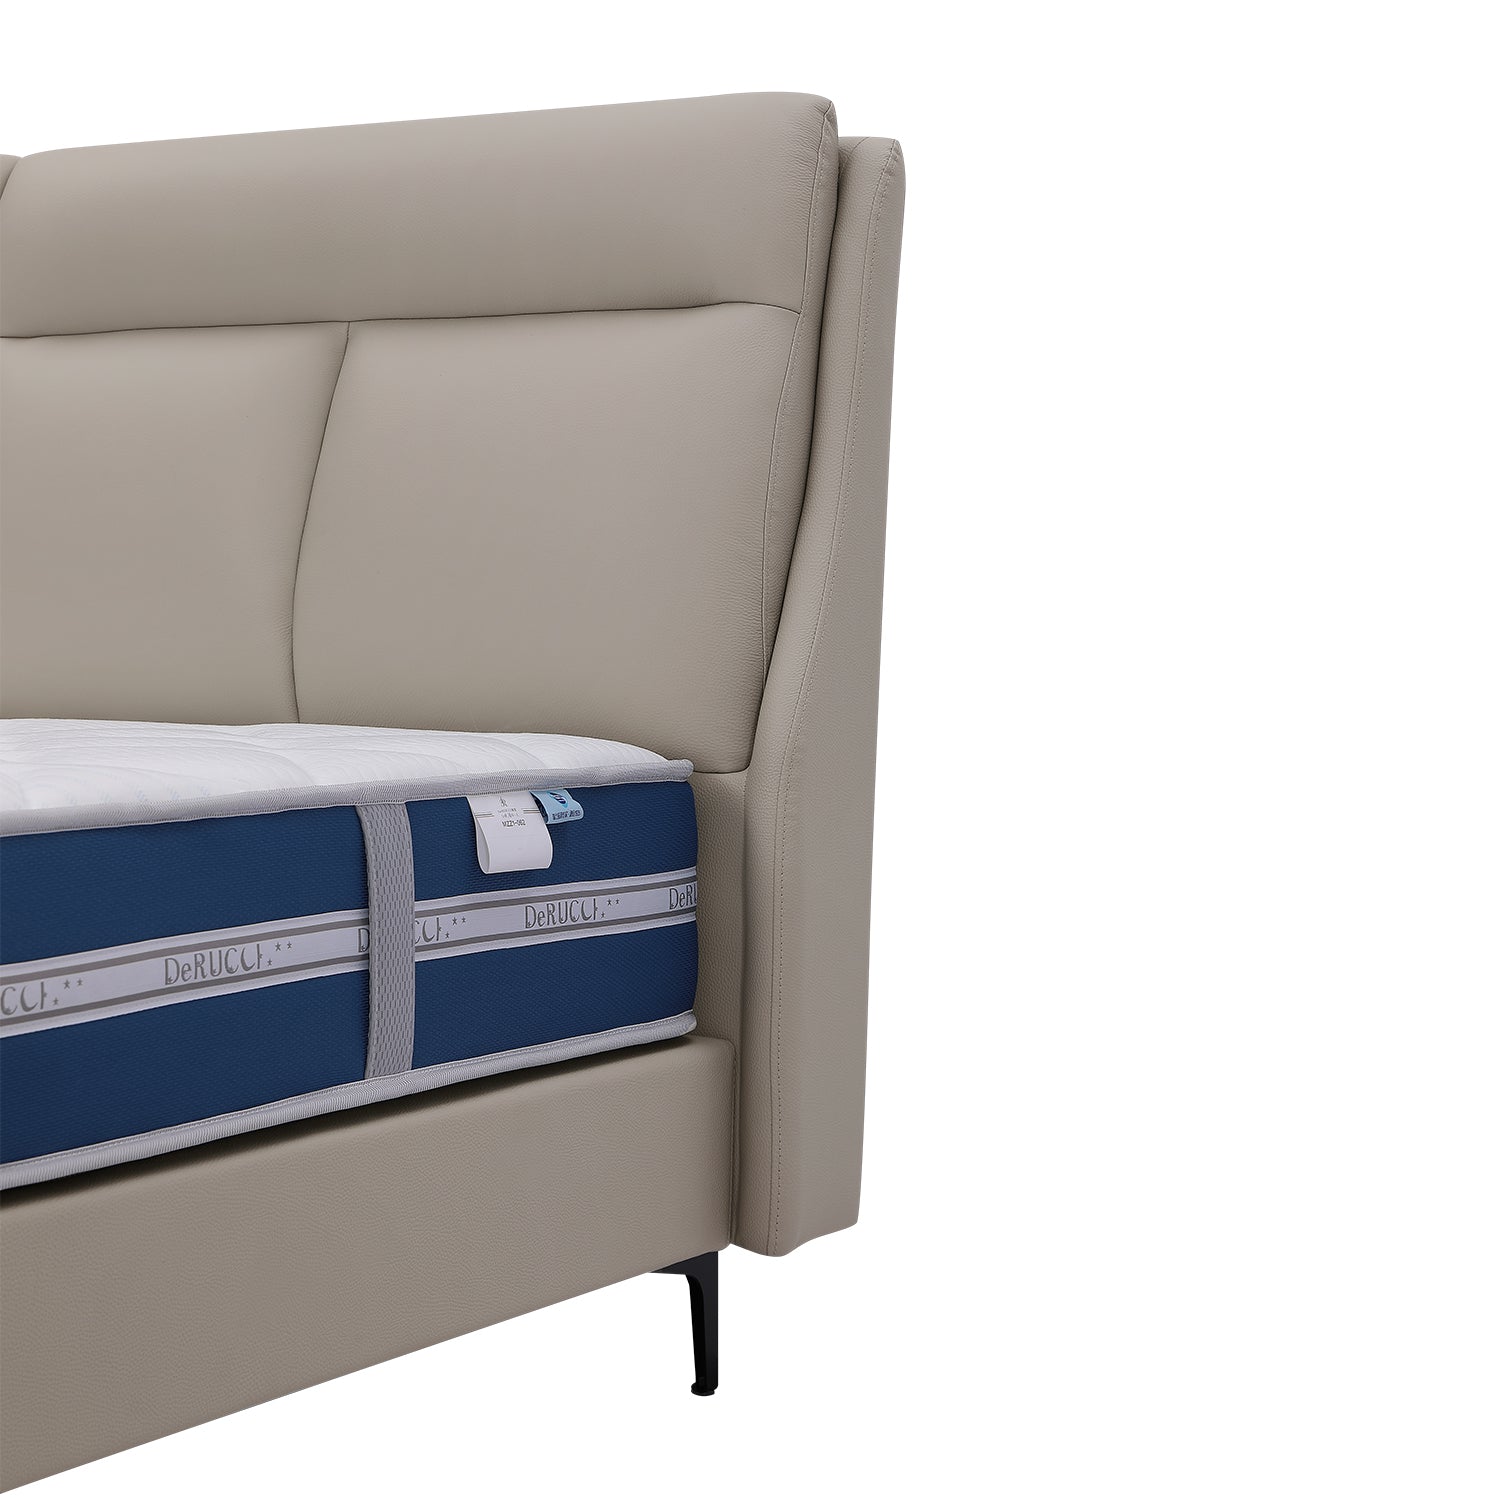 DeRUCCI Bed Frame BOC1 - 002 with beige leather upholstery and blue mattress